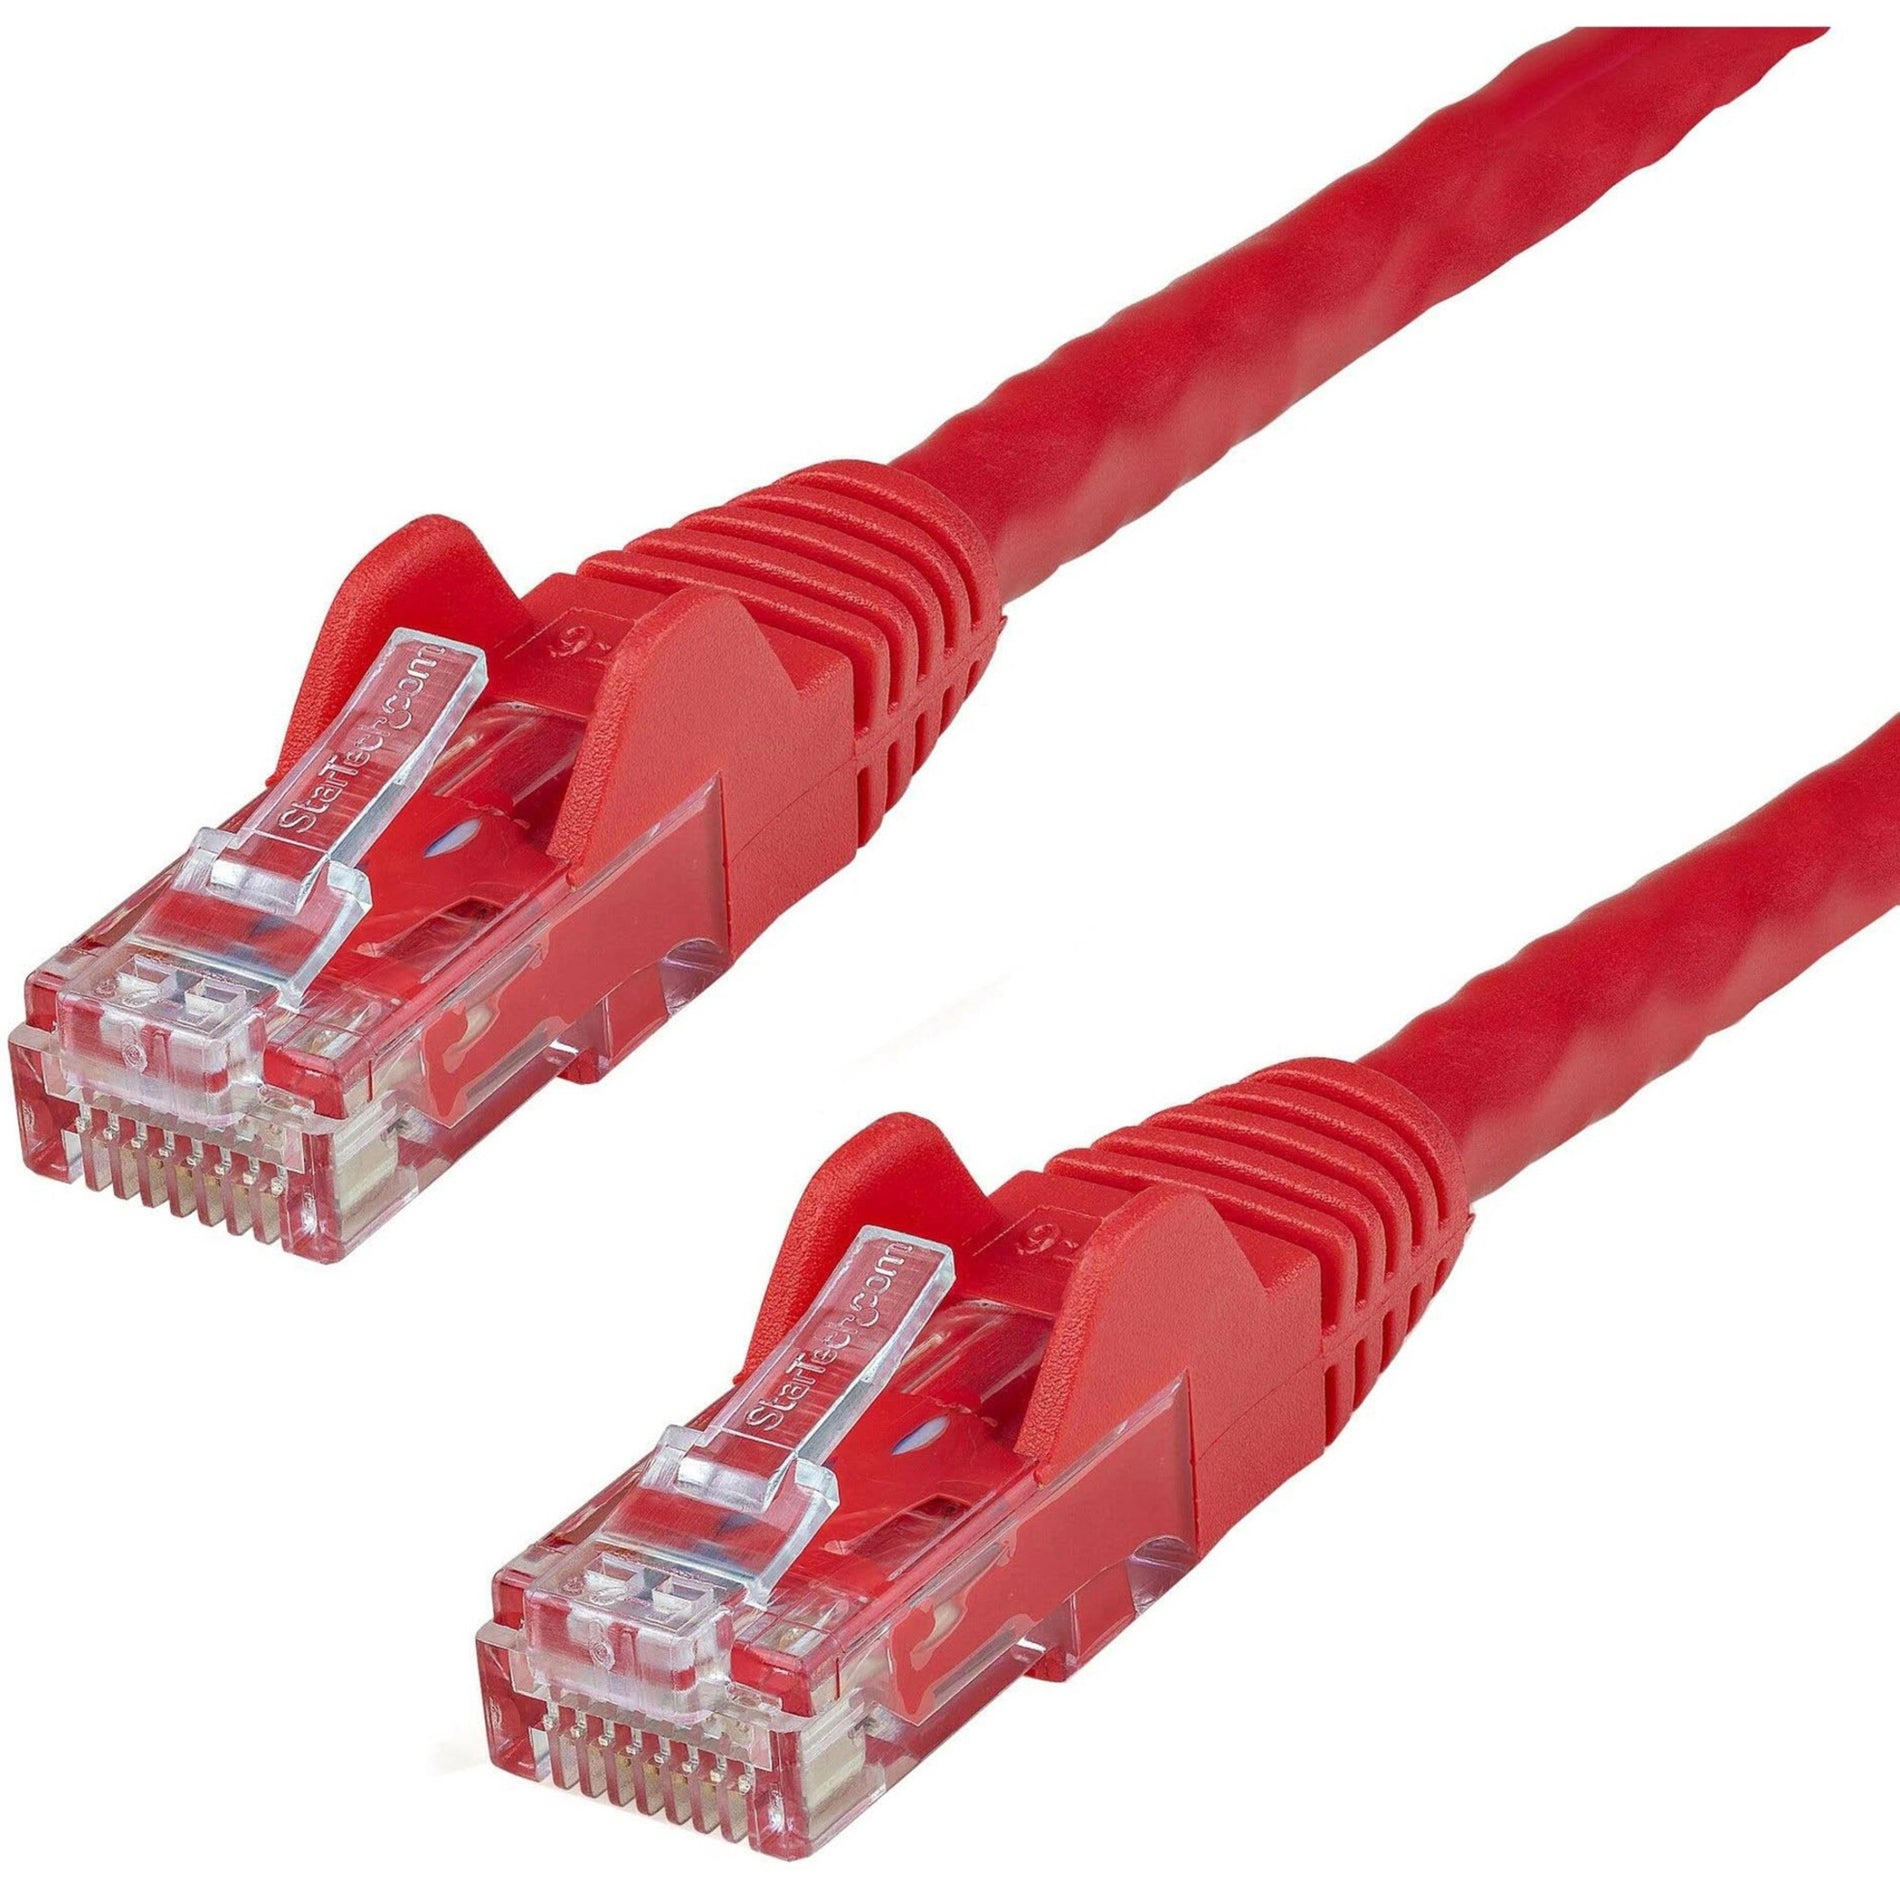 StarTech.com N6PATCH12RD Cat6 Patch Cable, 12ft Red Ethernet Cable, Snagless RJ45 Connectors